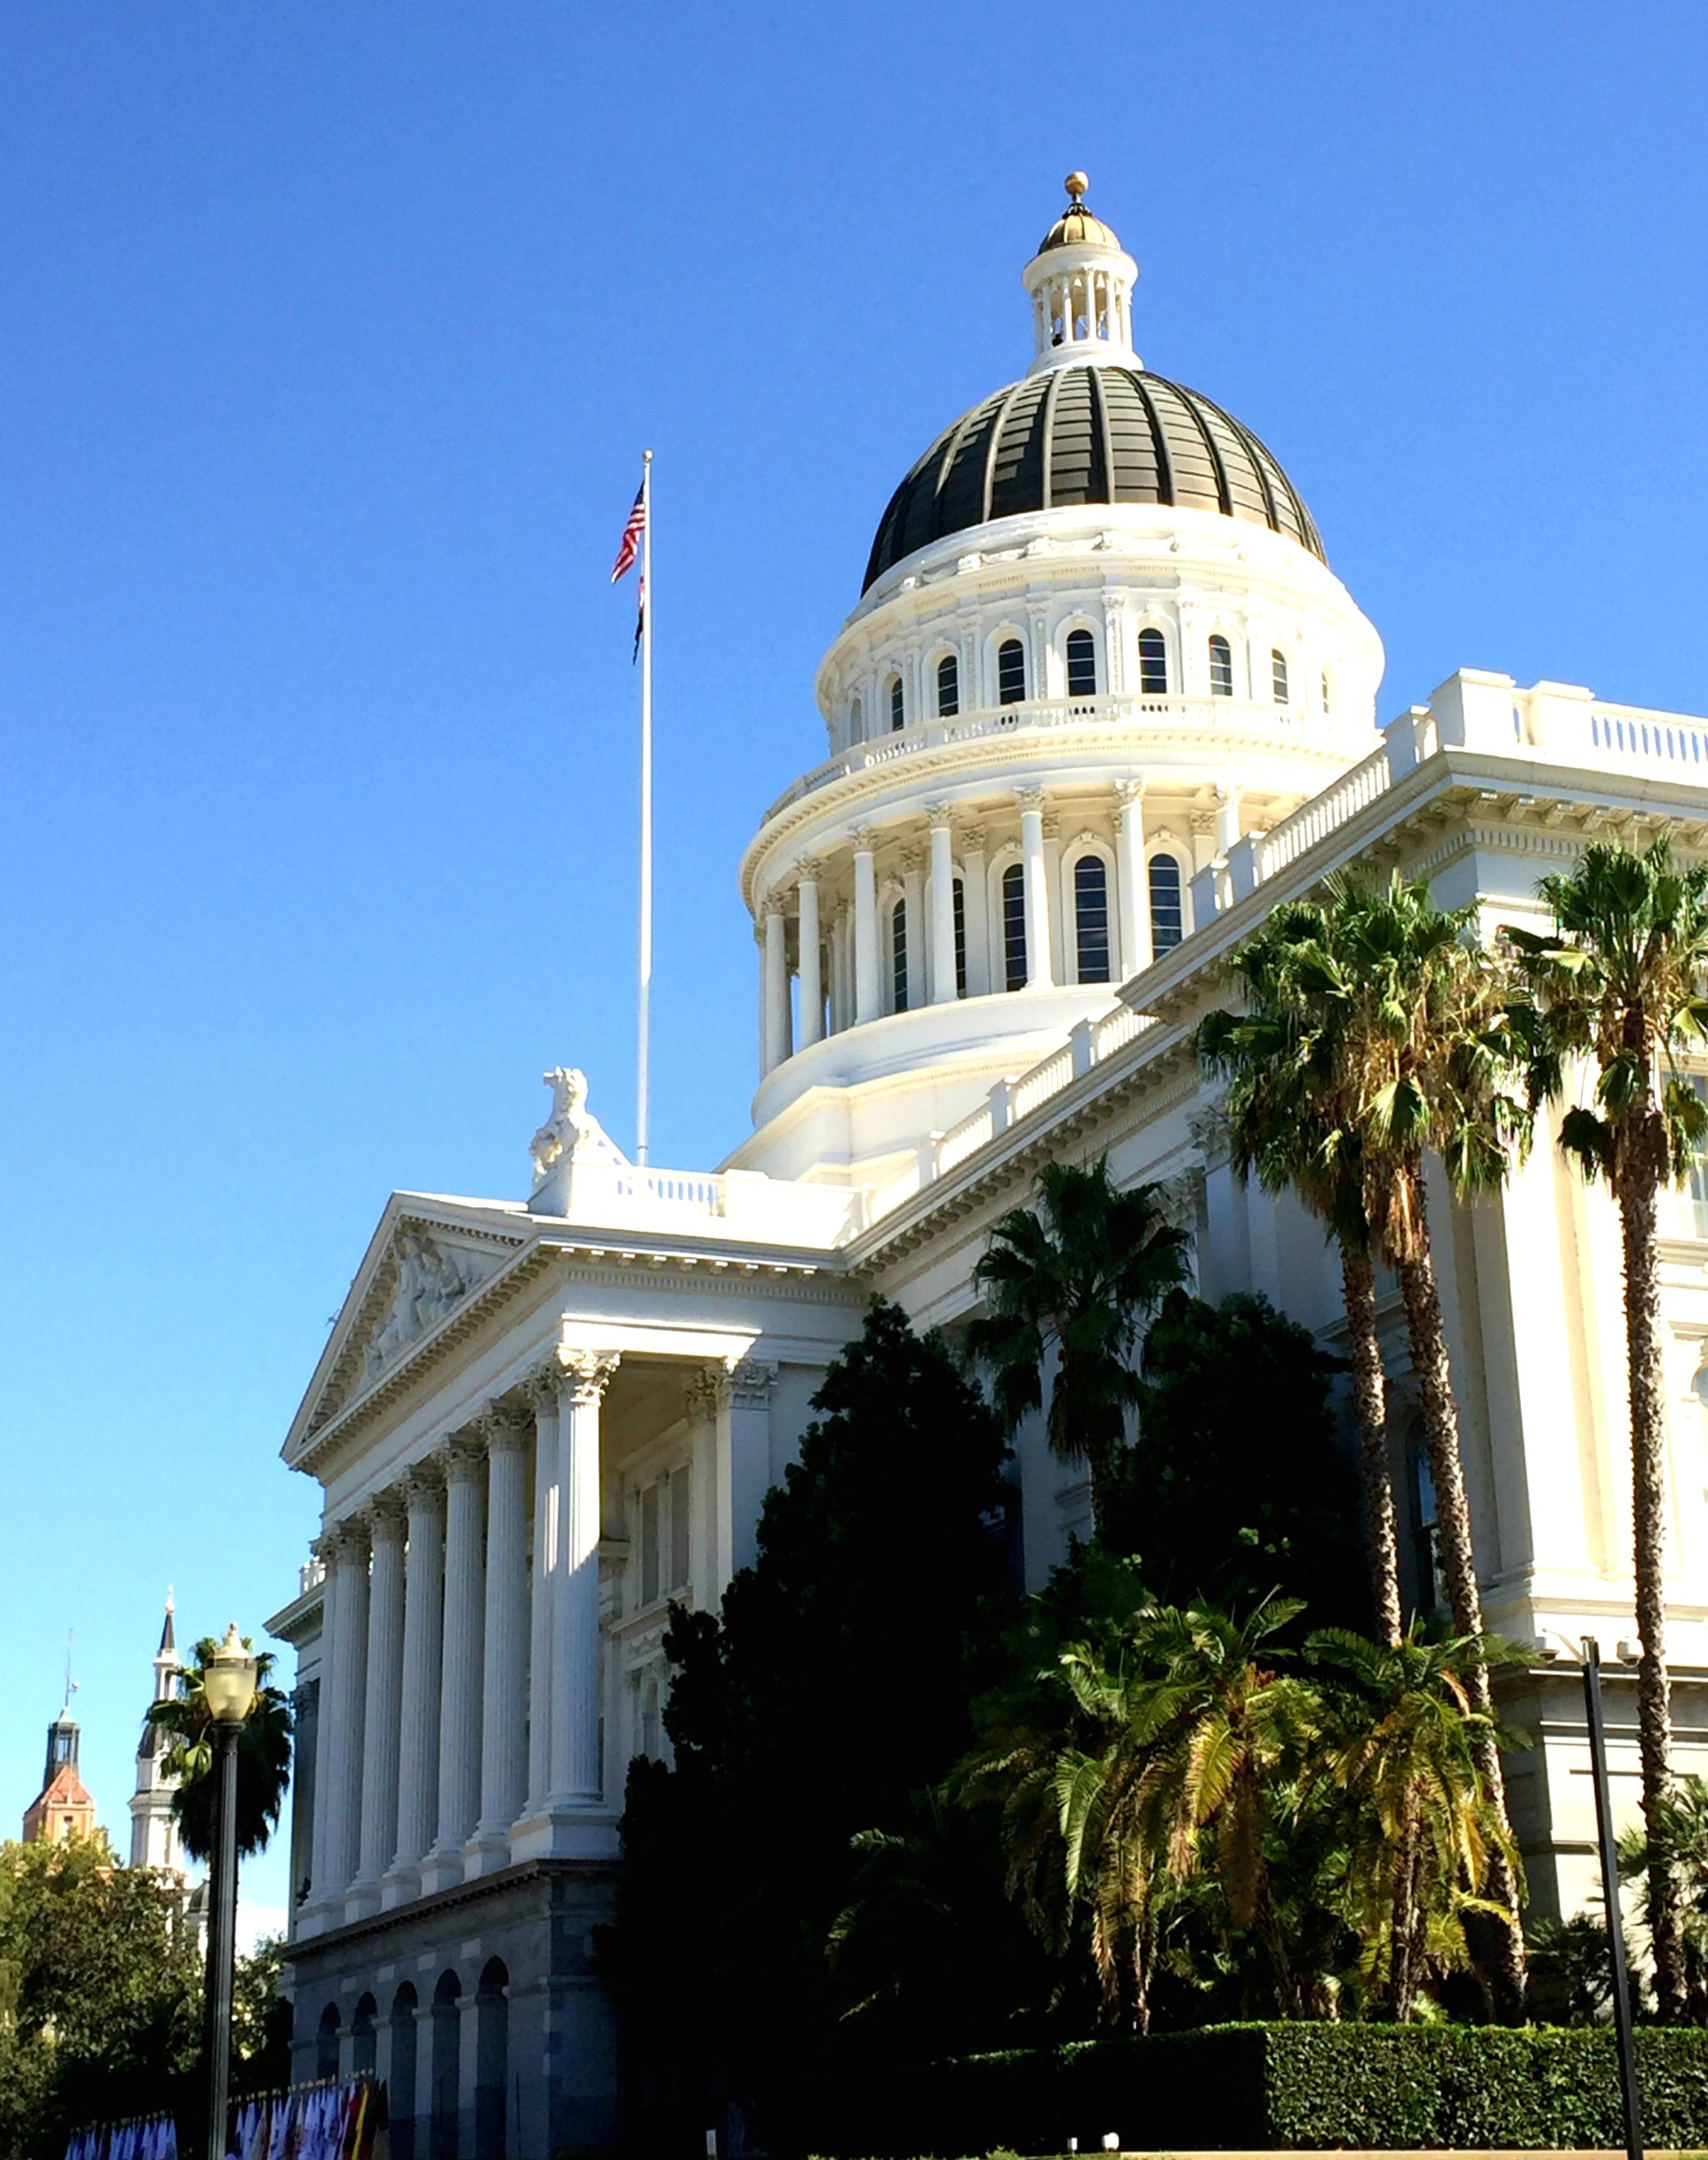 Cali State Capitol Building. Tours inside.
More on www.ajauntwithjoy.com